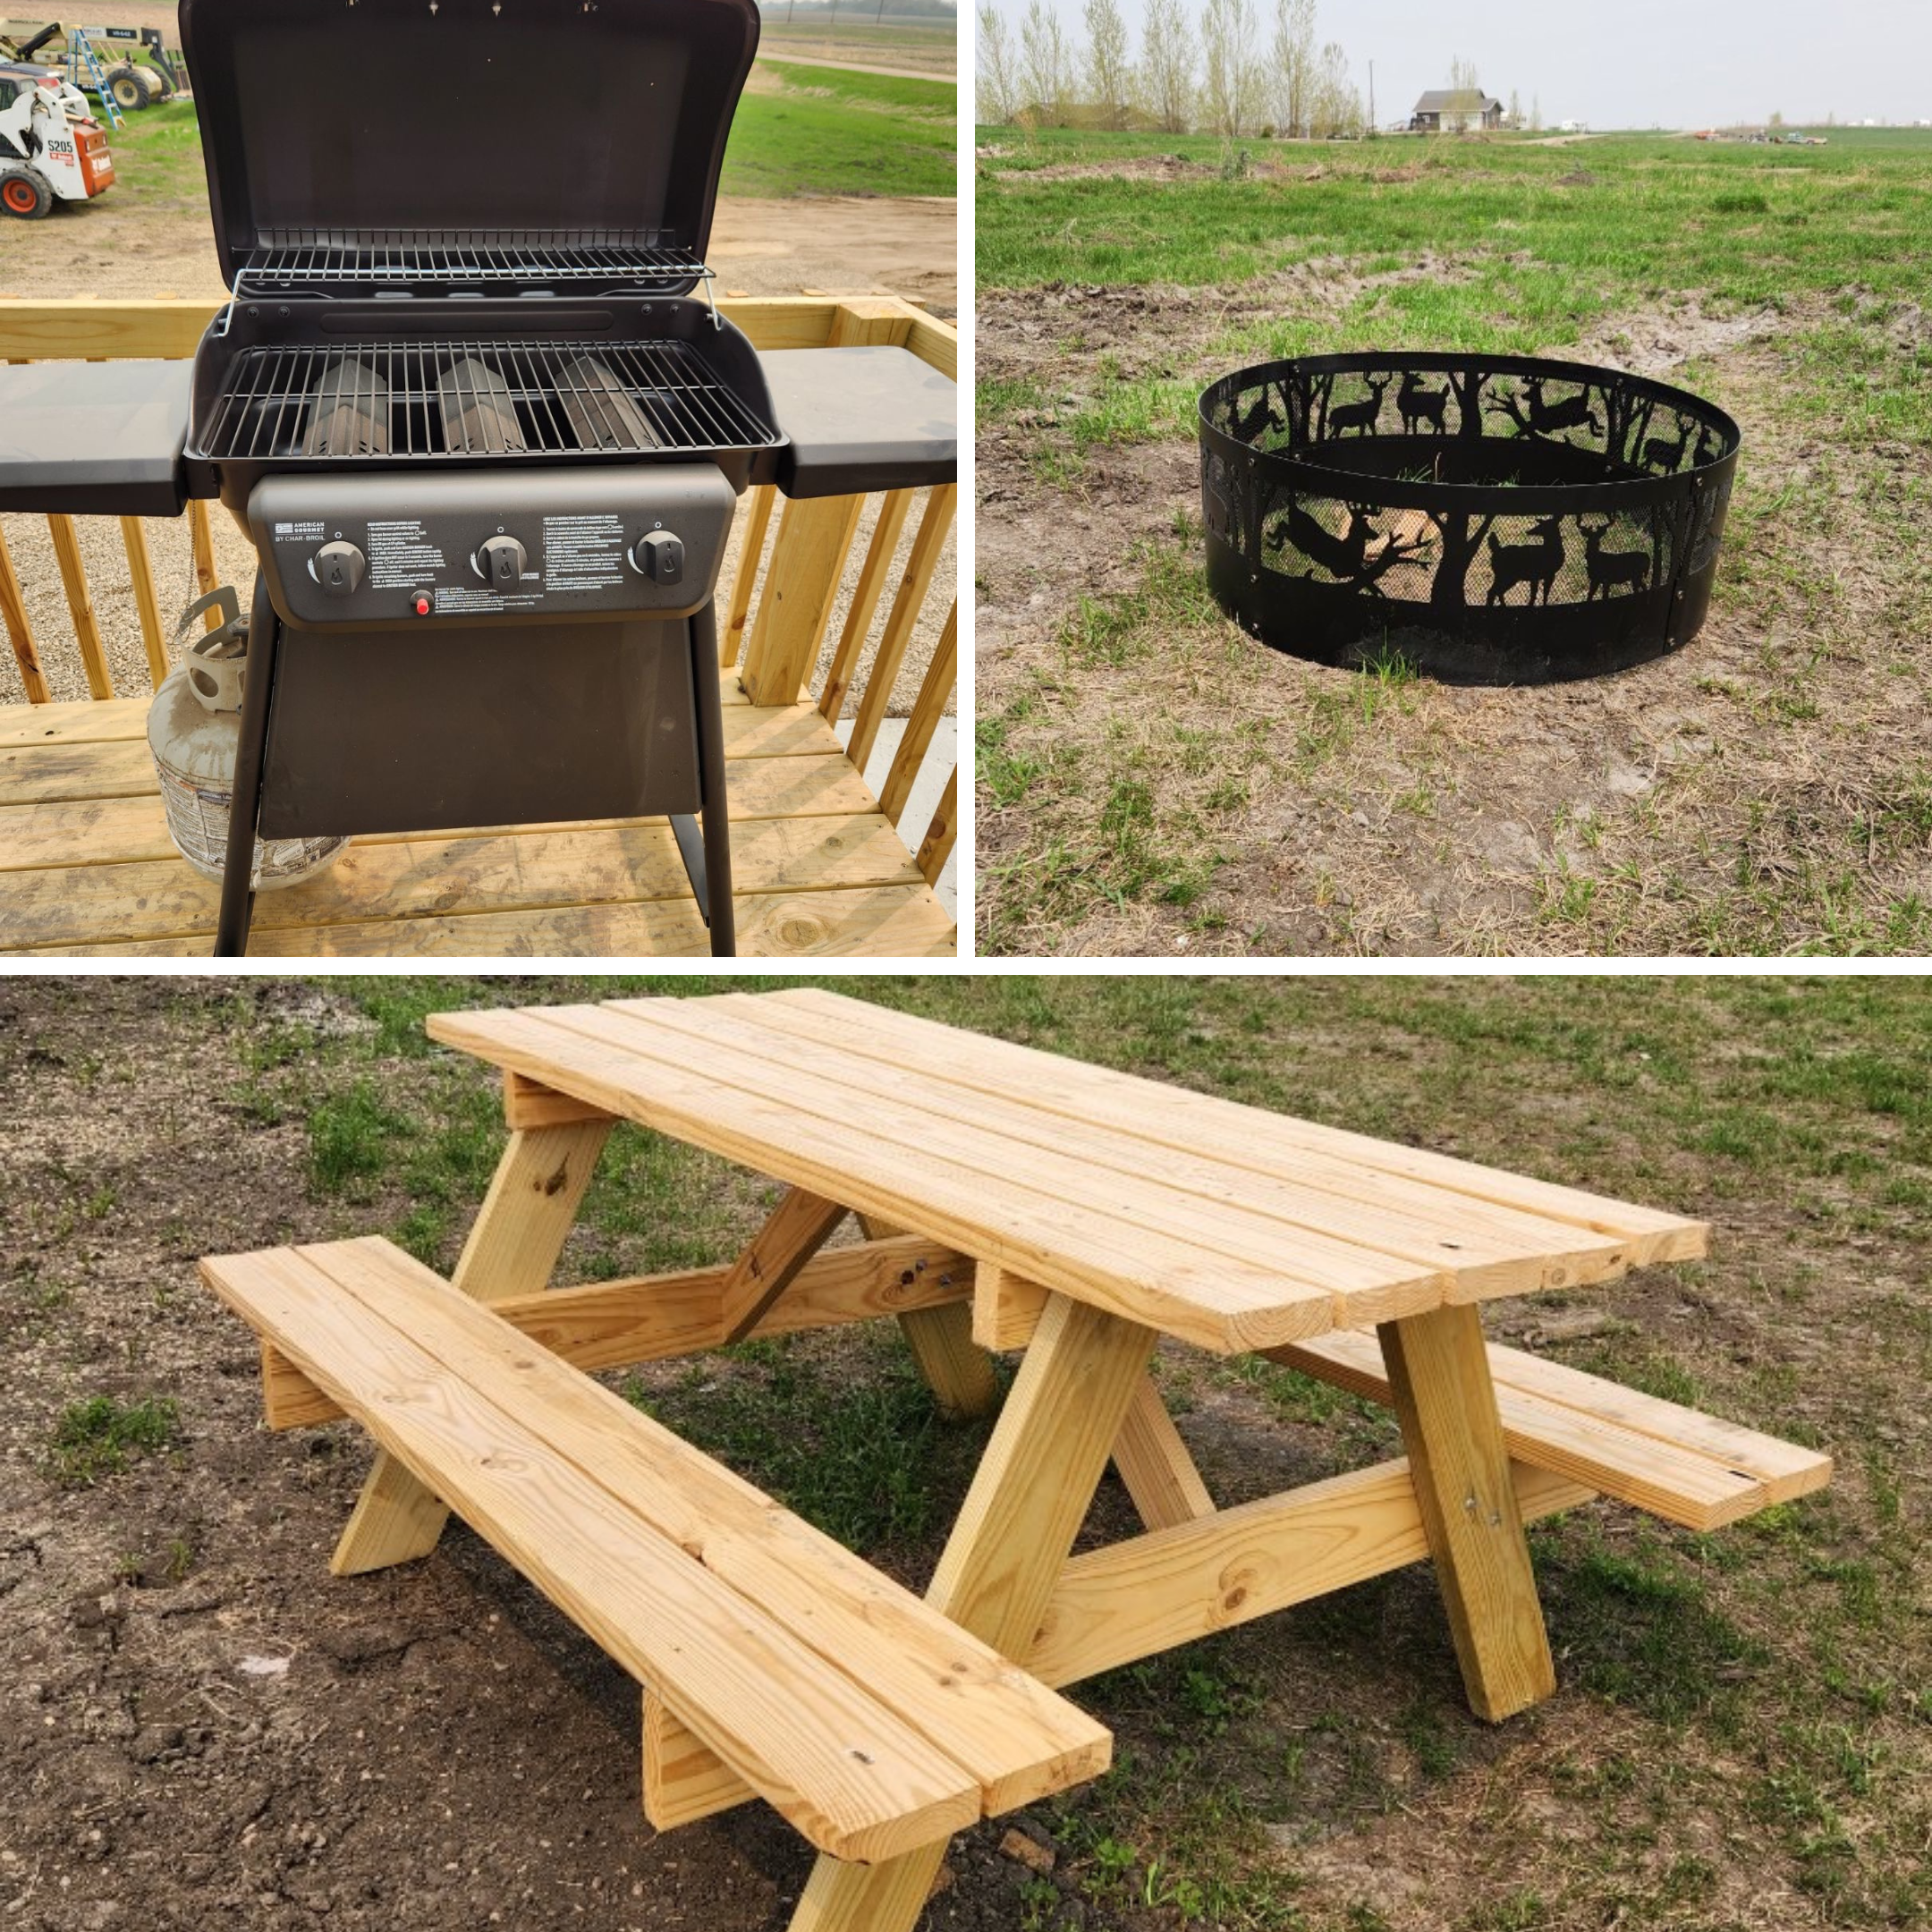 Restful Refuge cabin grill, fire pit, and picnic table by Devils Lake, North Dakota